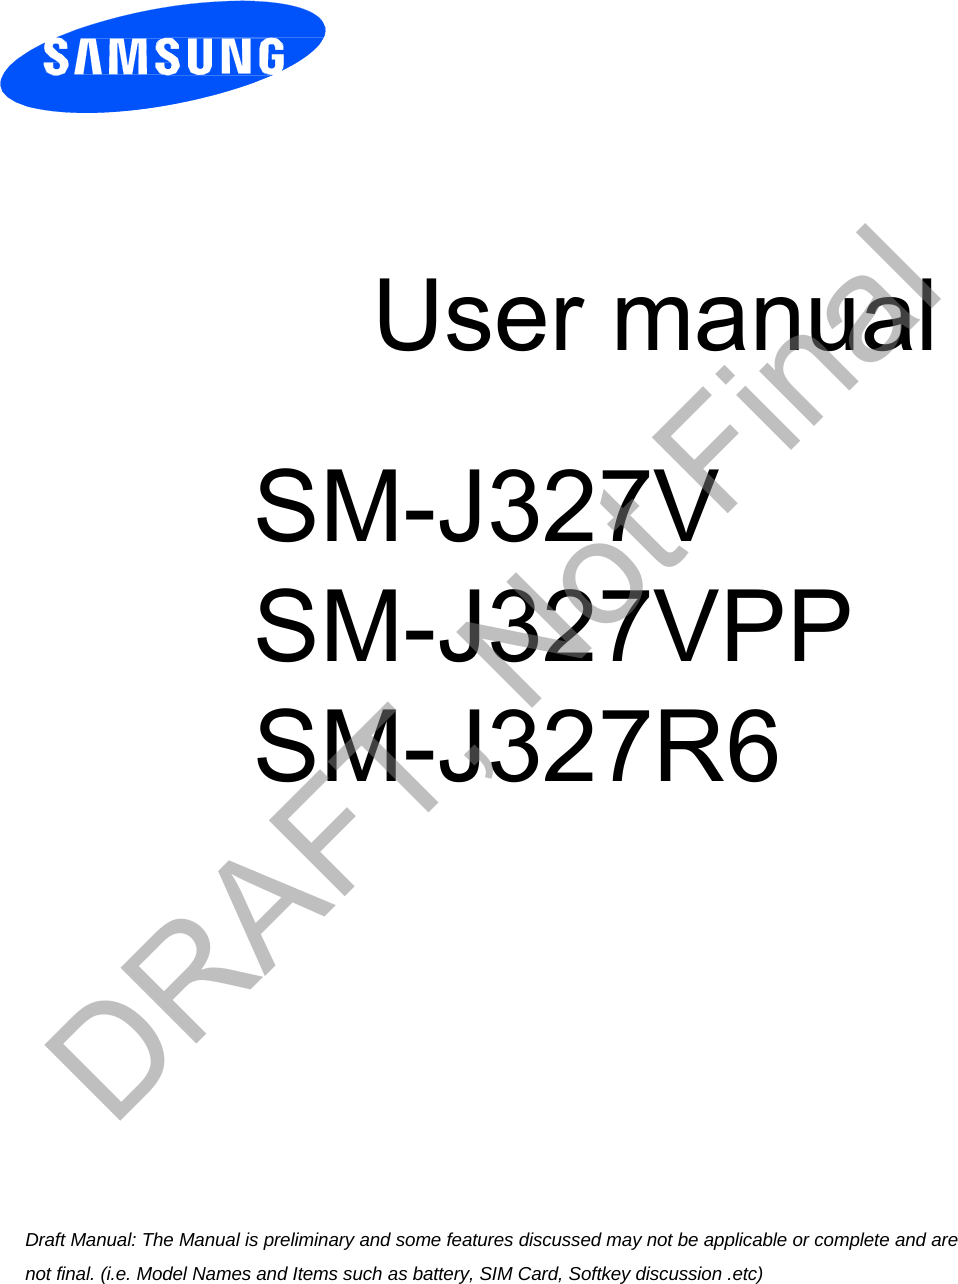 User manual SM-J327V SM-J327VPPSM-J327R6 Draft Manual: The Manual is preliminary and some features discussed may not be applicable or complete and are not final. (i.e. Model Names and Items such as battery, SIM Card, Softkey discussion .etc) DRAFT, Not Final